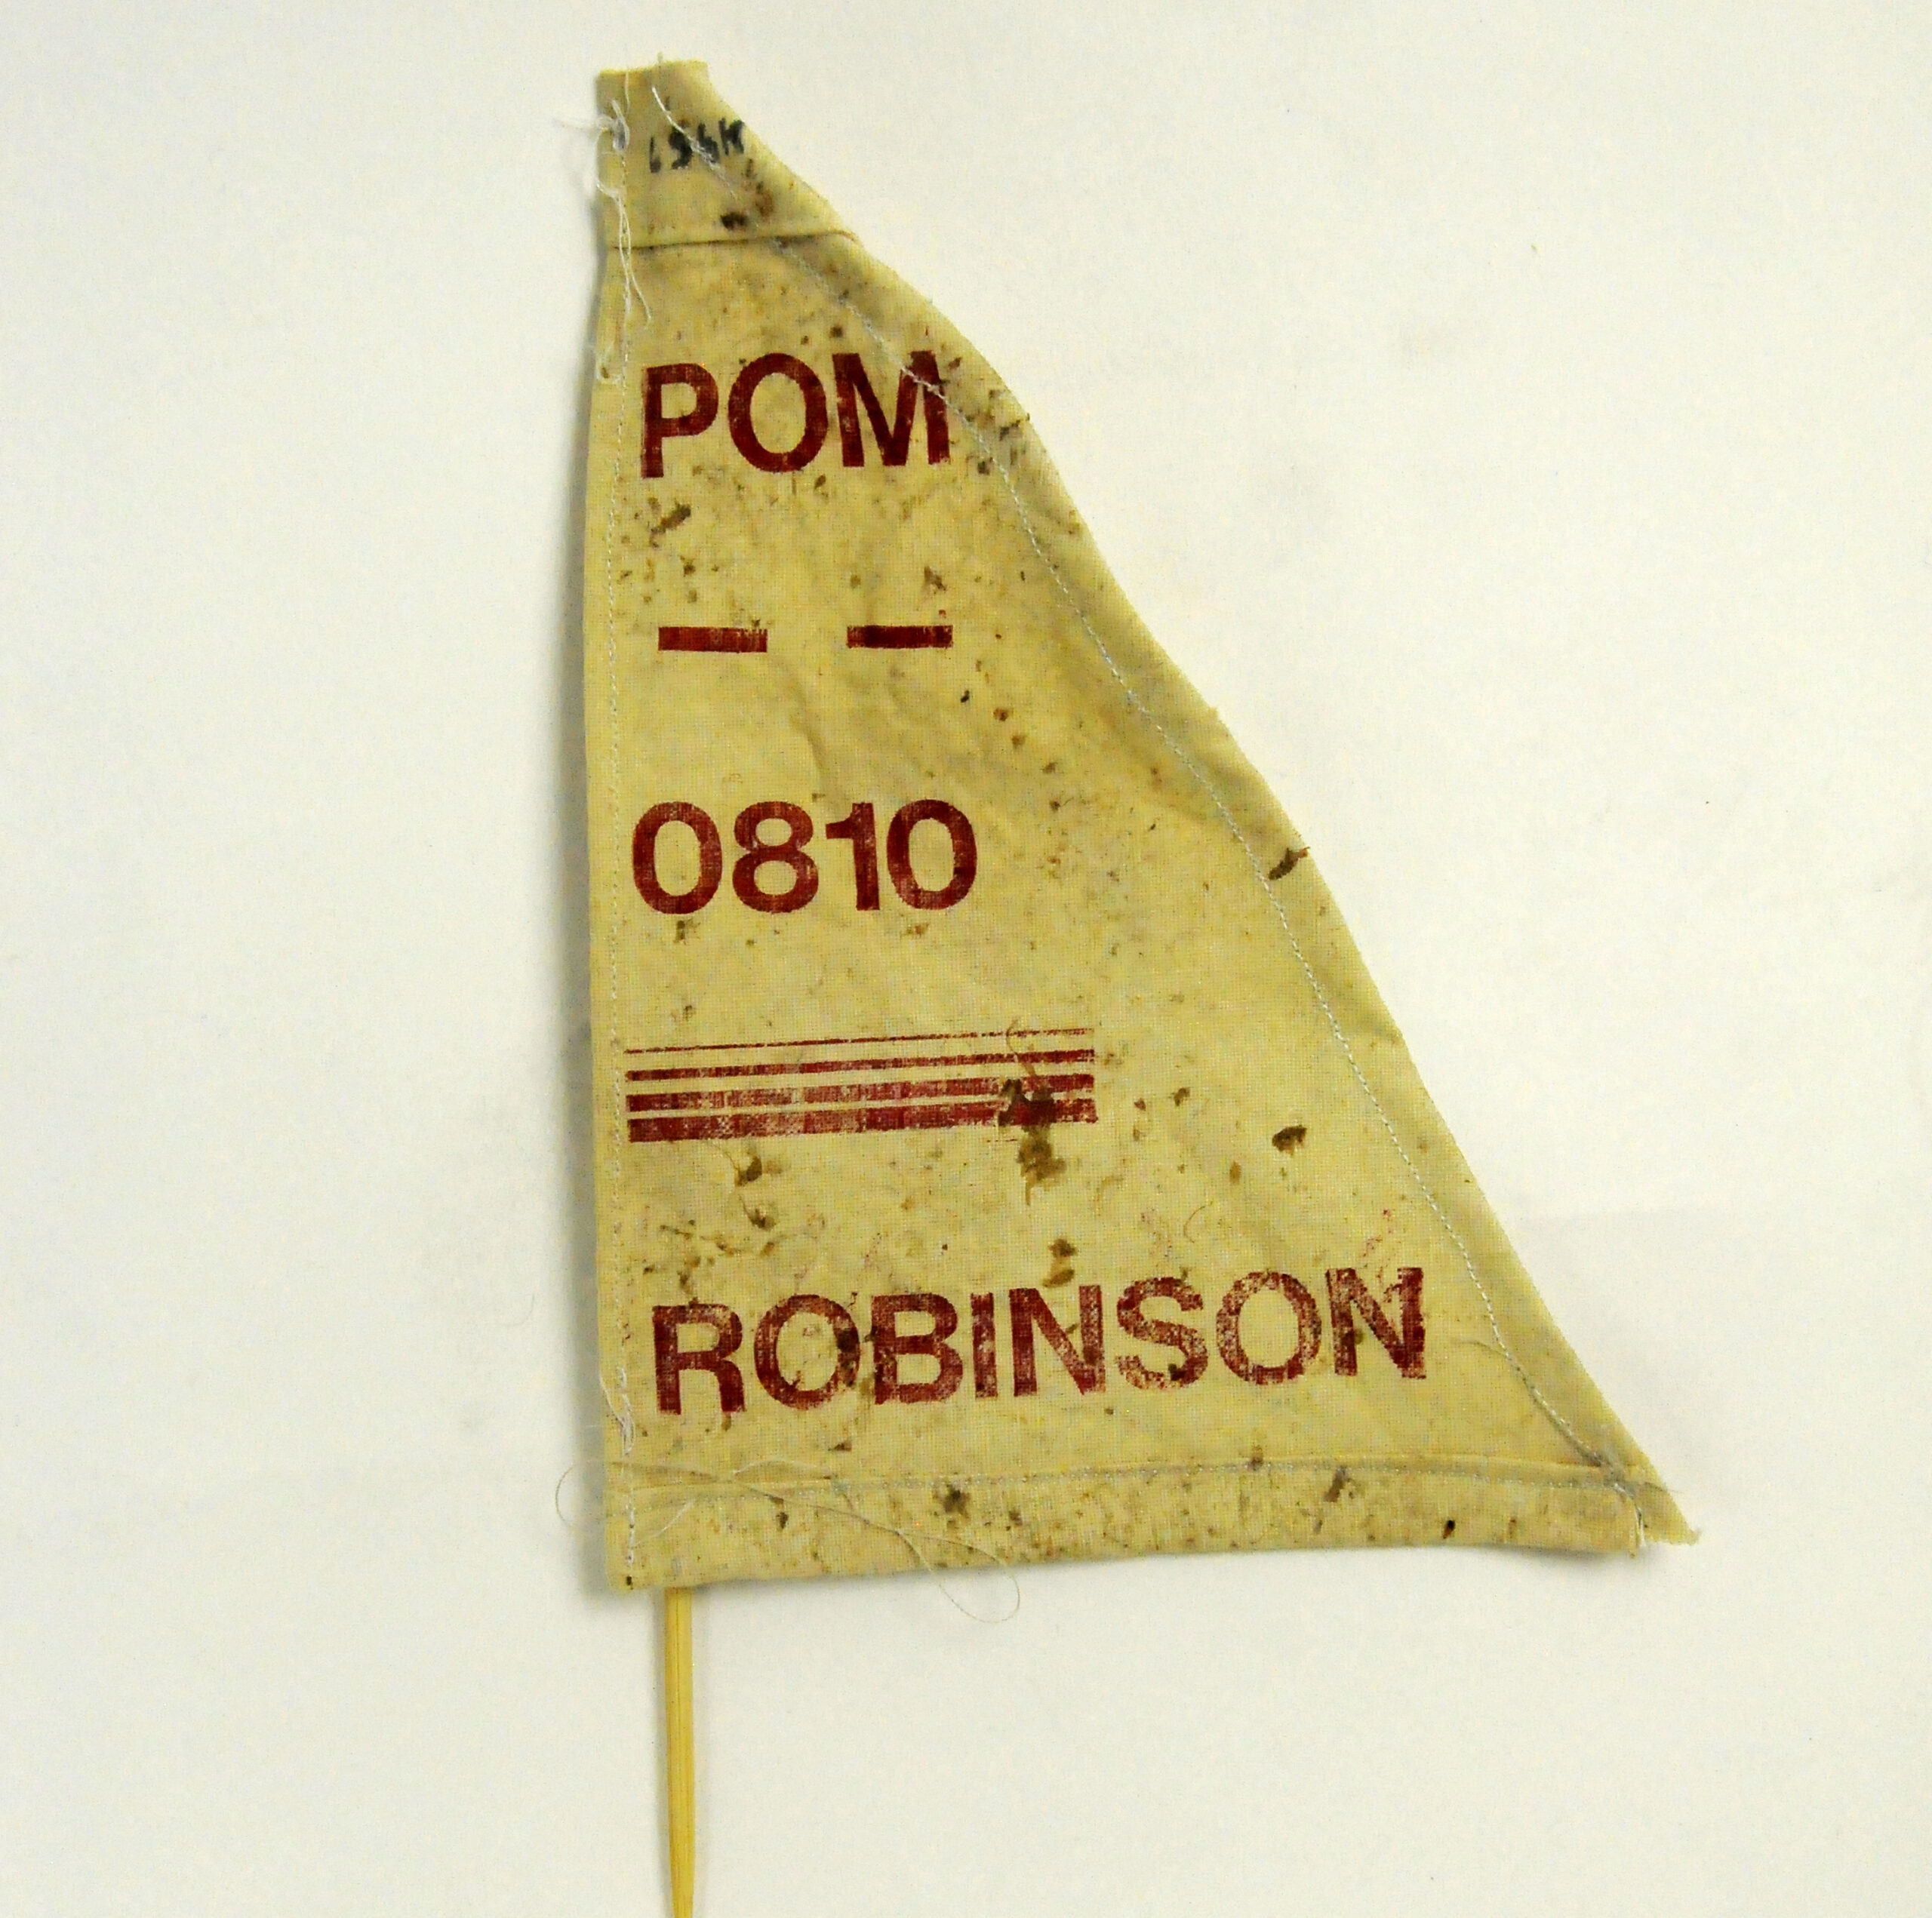 Artwork by Clementine Thomas, looks to be a pennant flag in yellow rough materials with the work 'POM' '0810' and then 'ROBINSON' all in red printed on top.